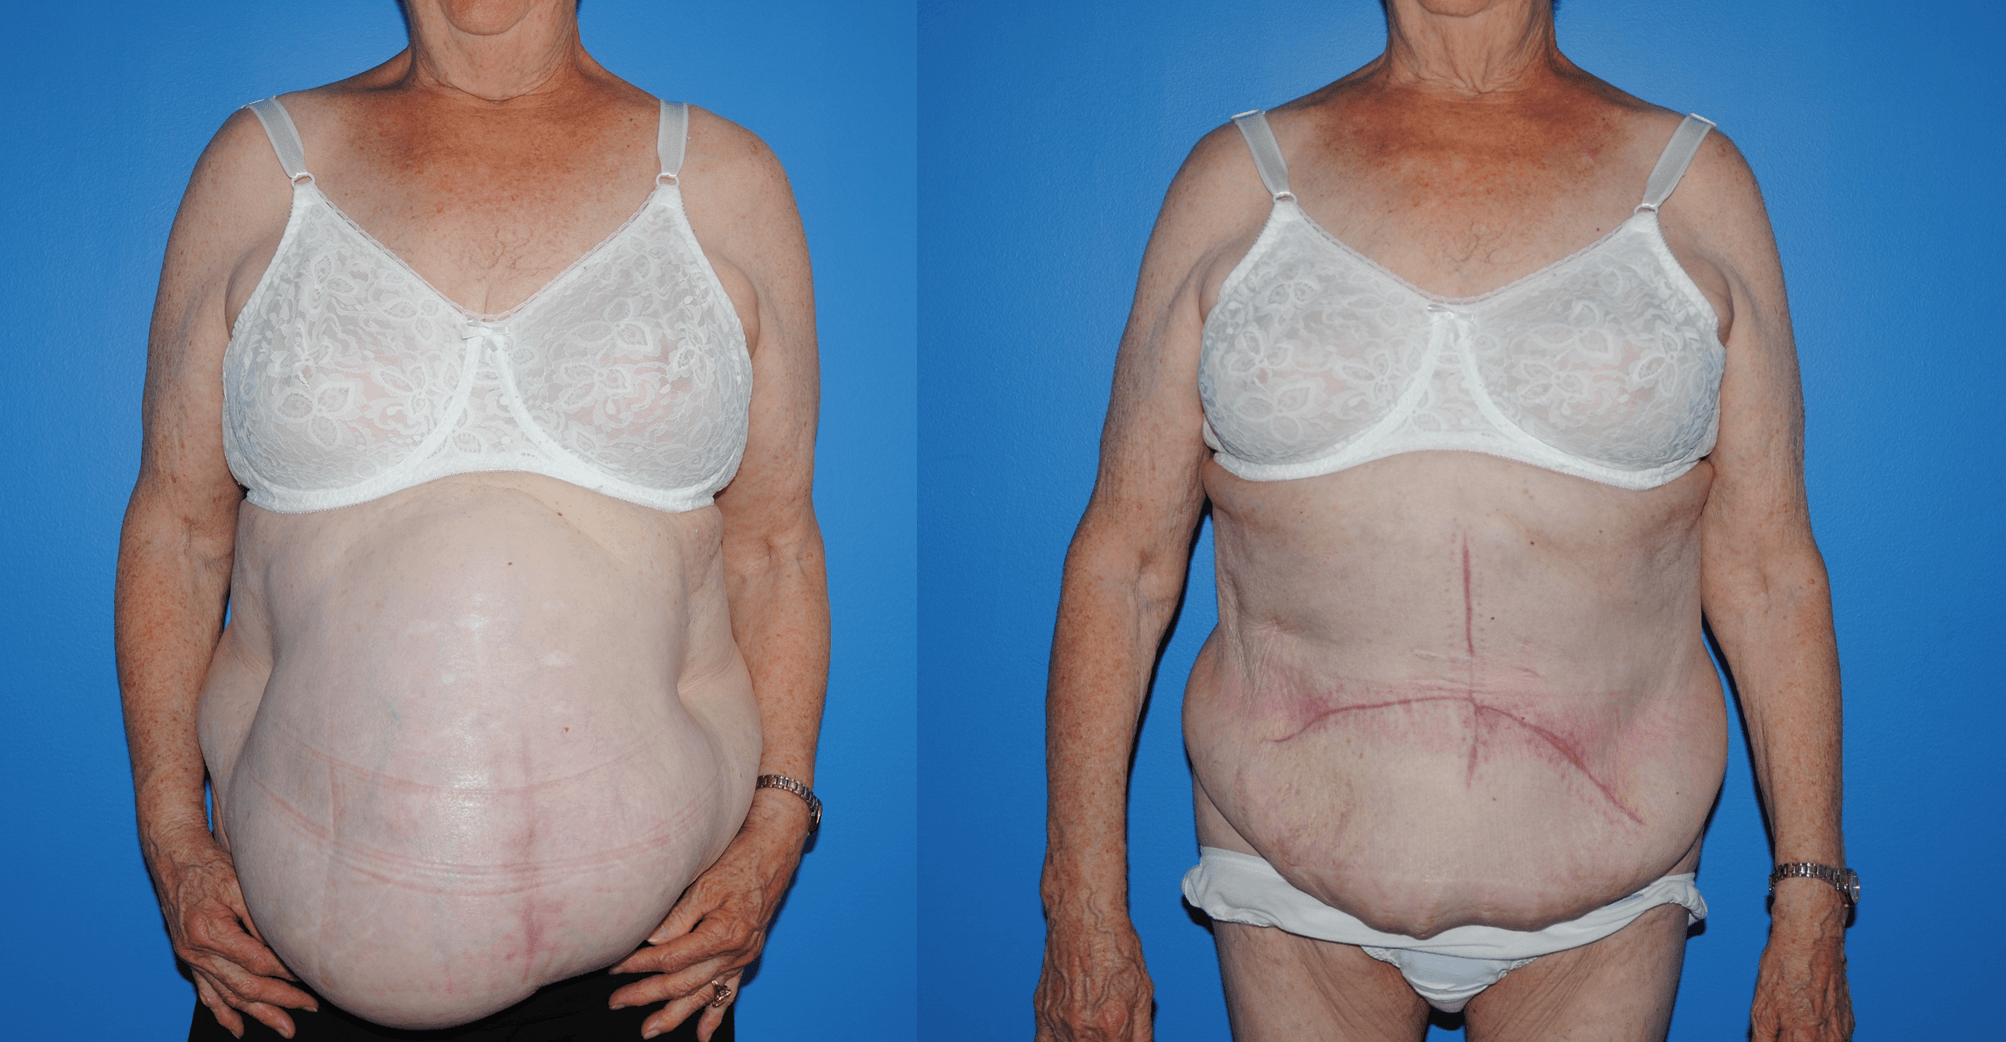 Hernia Repair with Component Separation and Strattice